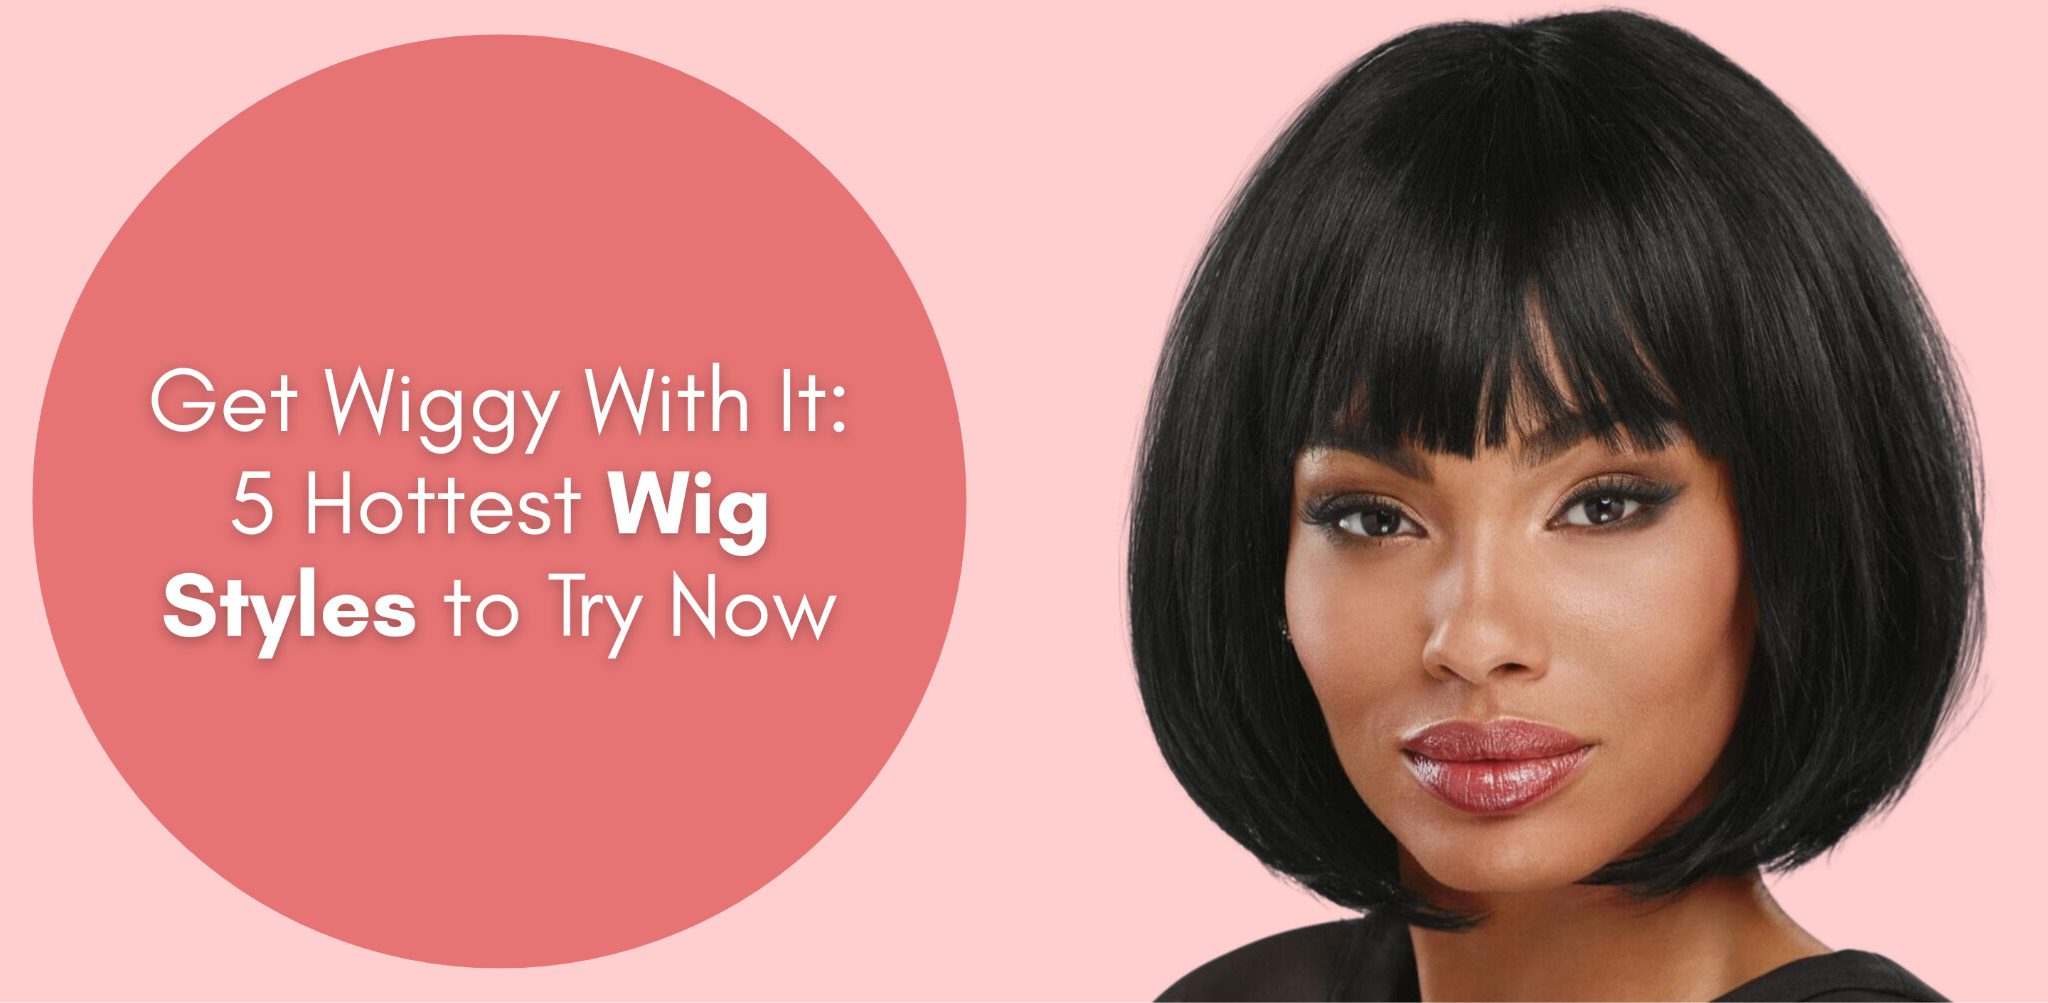 Get Wiggy With It: 5 Hottest Wig Styles to Try Now